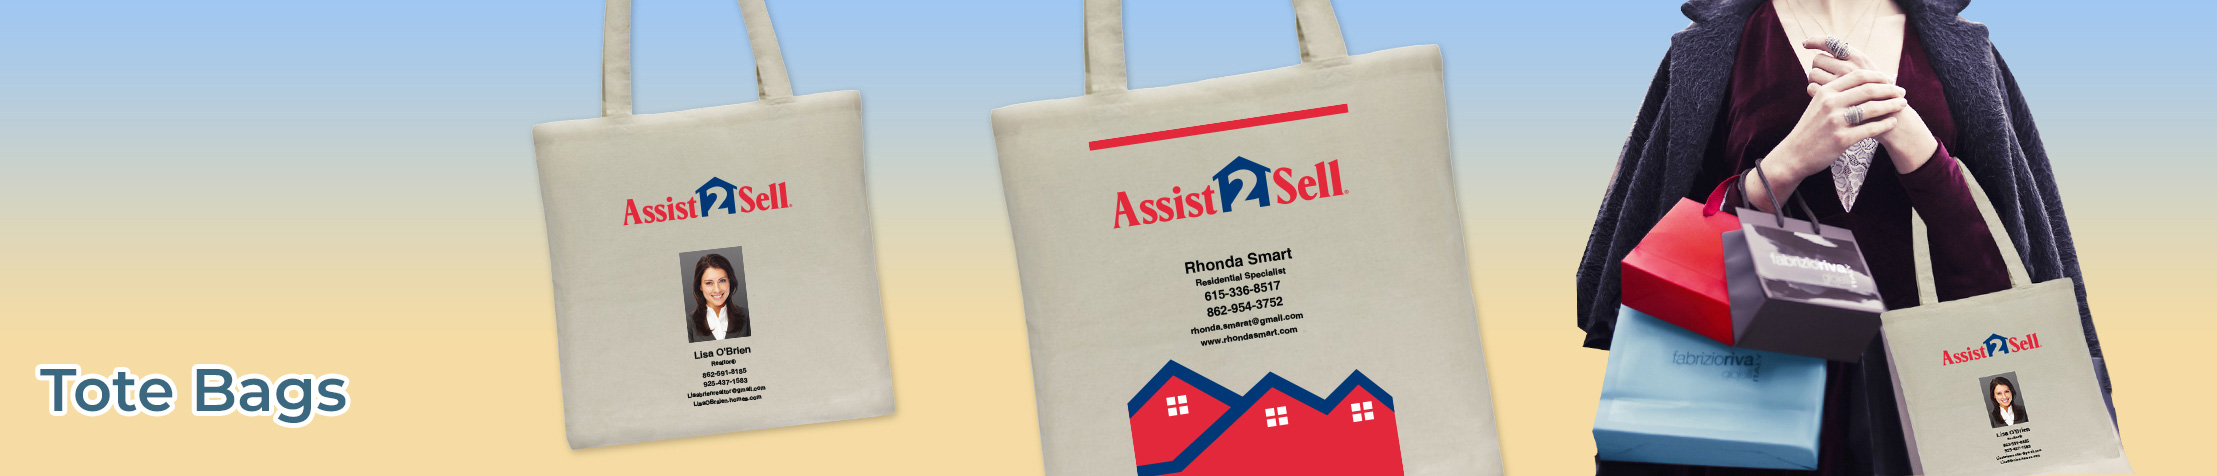 Assit2Sell Real Estate Tote Bags - Assit2Sell Real Estate  personalized realtor promotional products | BestPrintBuy.com